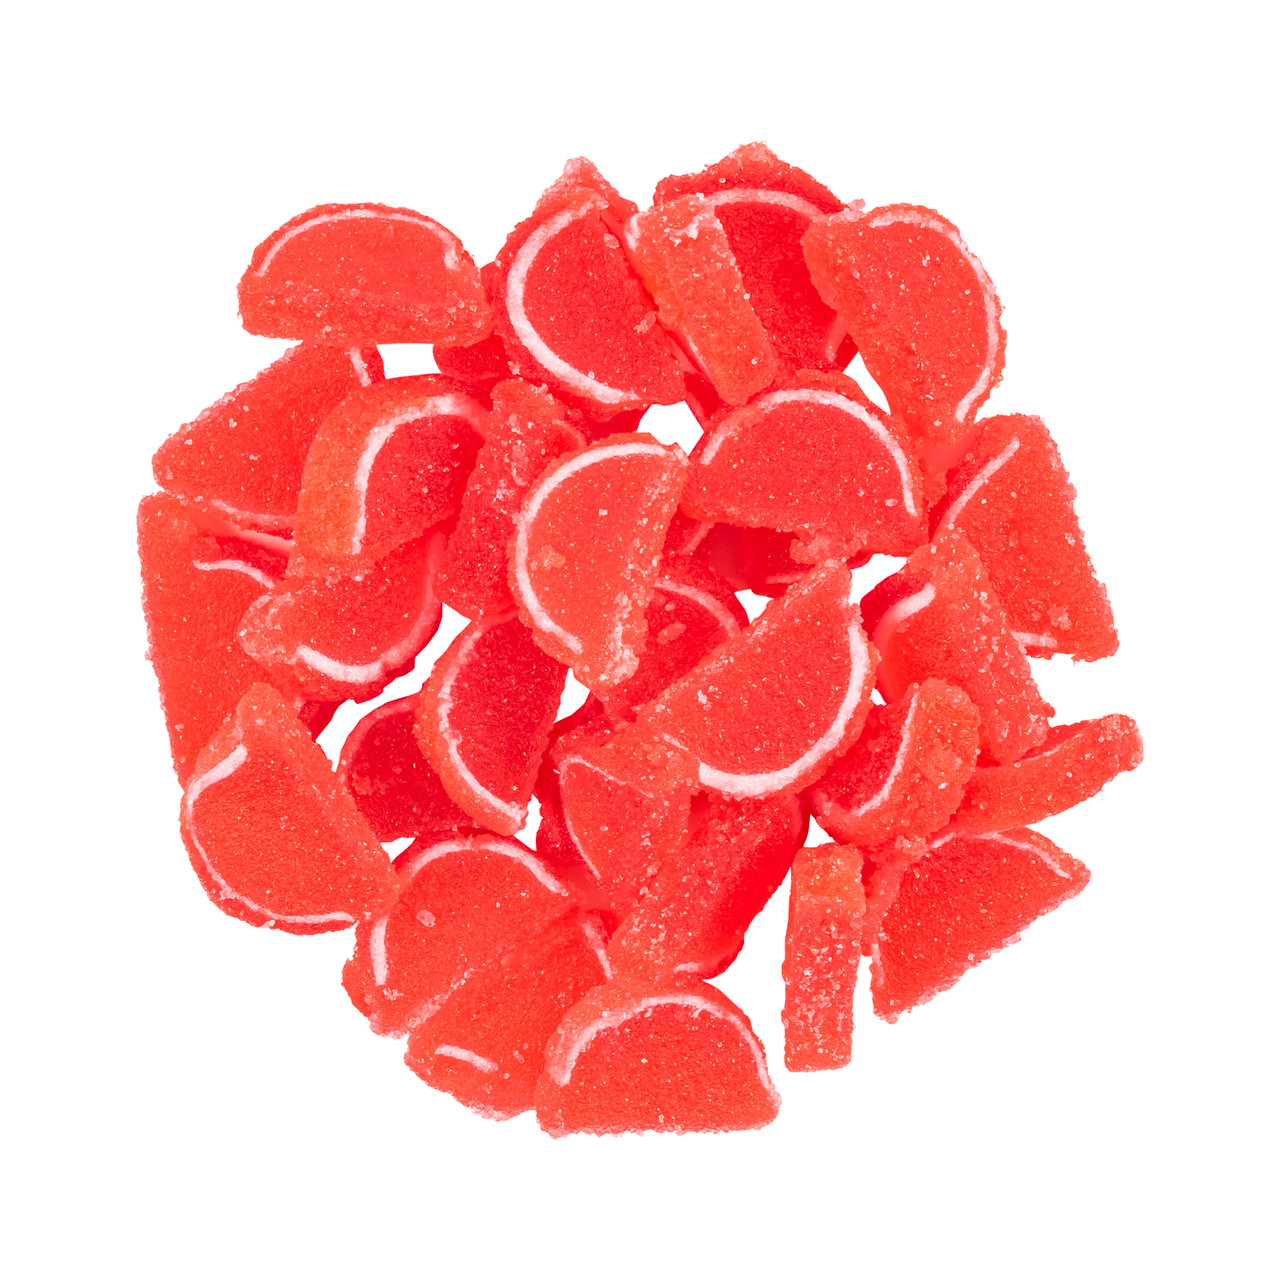 Red Raspberry Jelly Fruit Slices